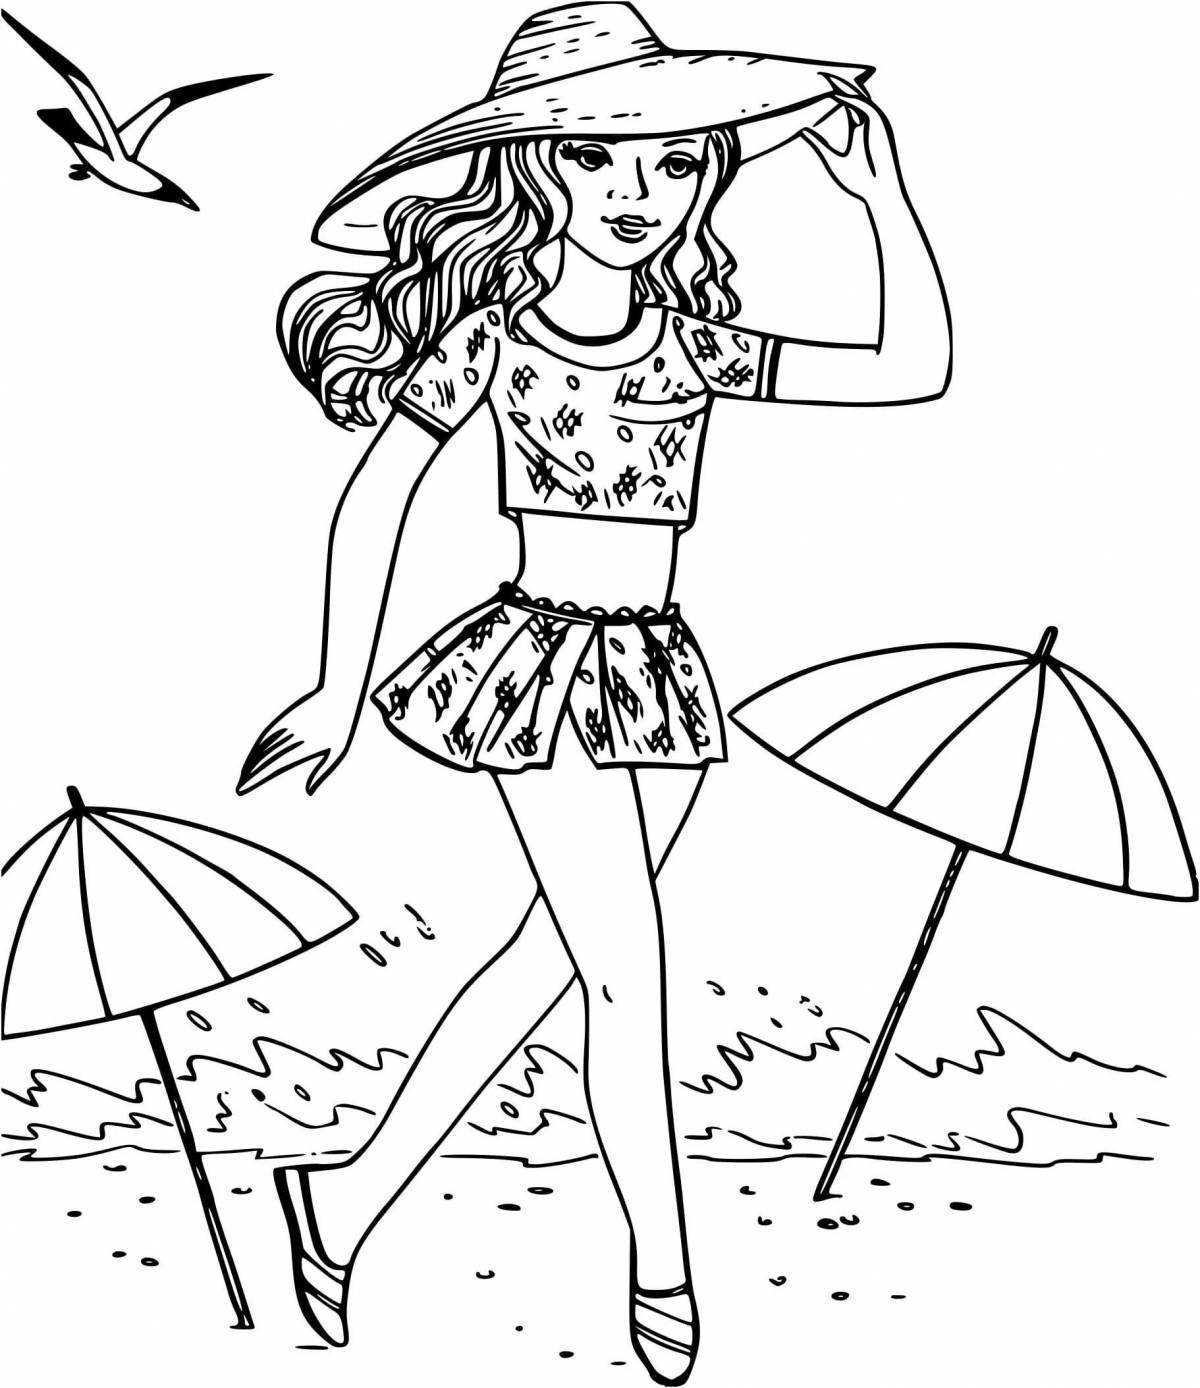 Adorable coloring pages for girls 12 years old